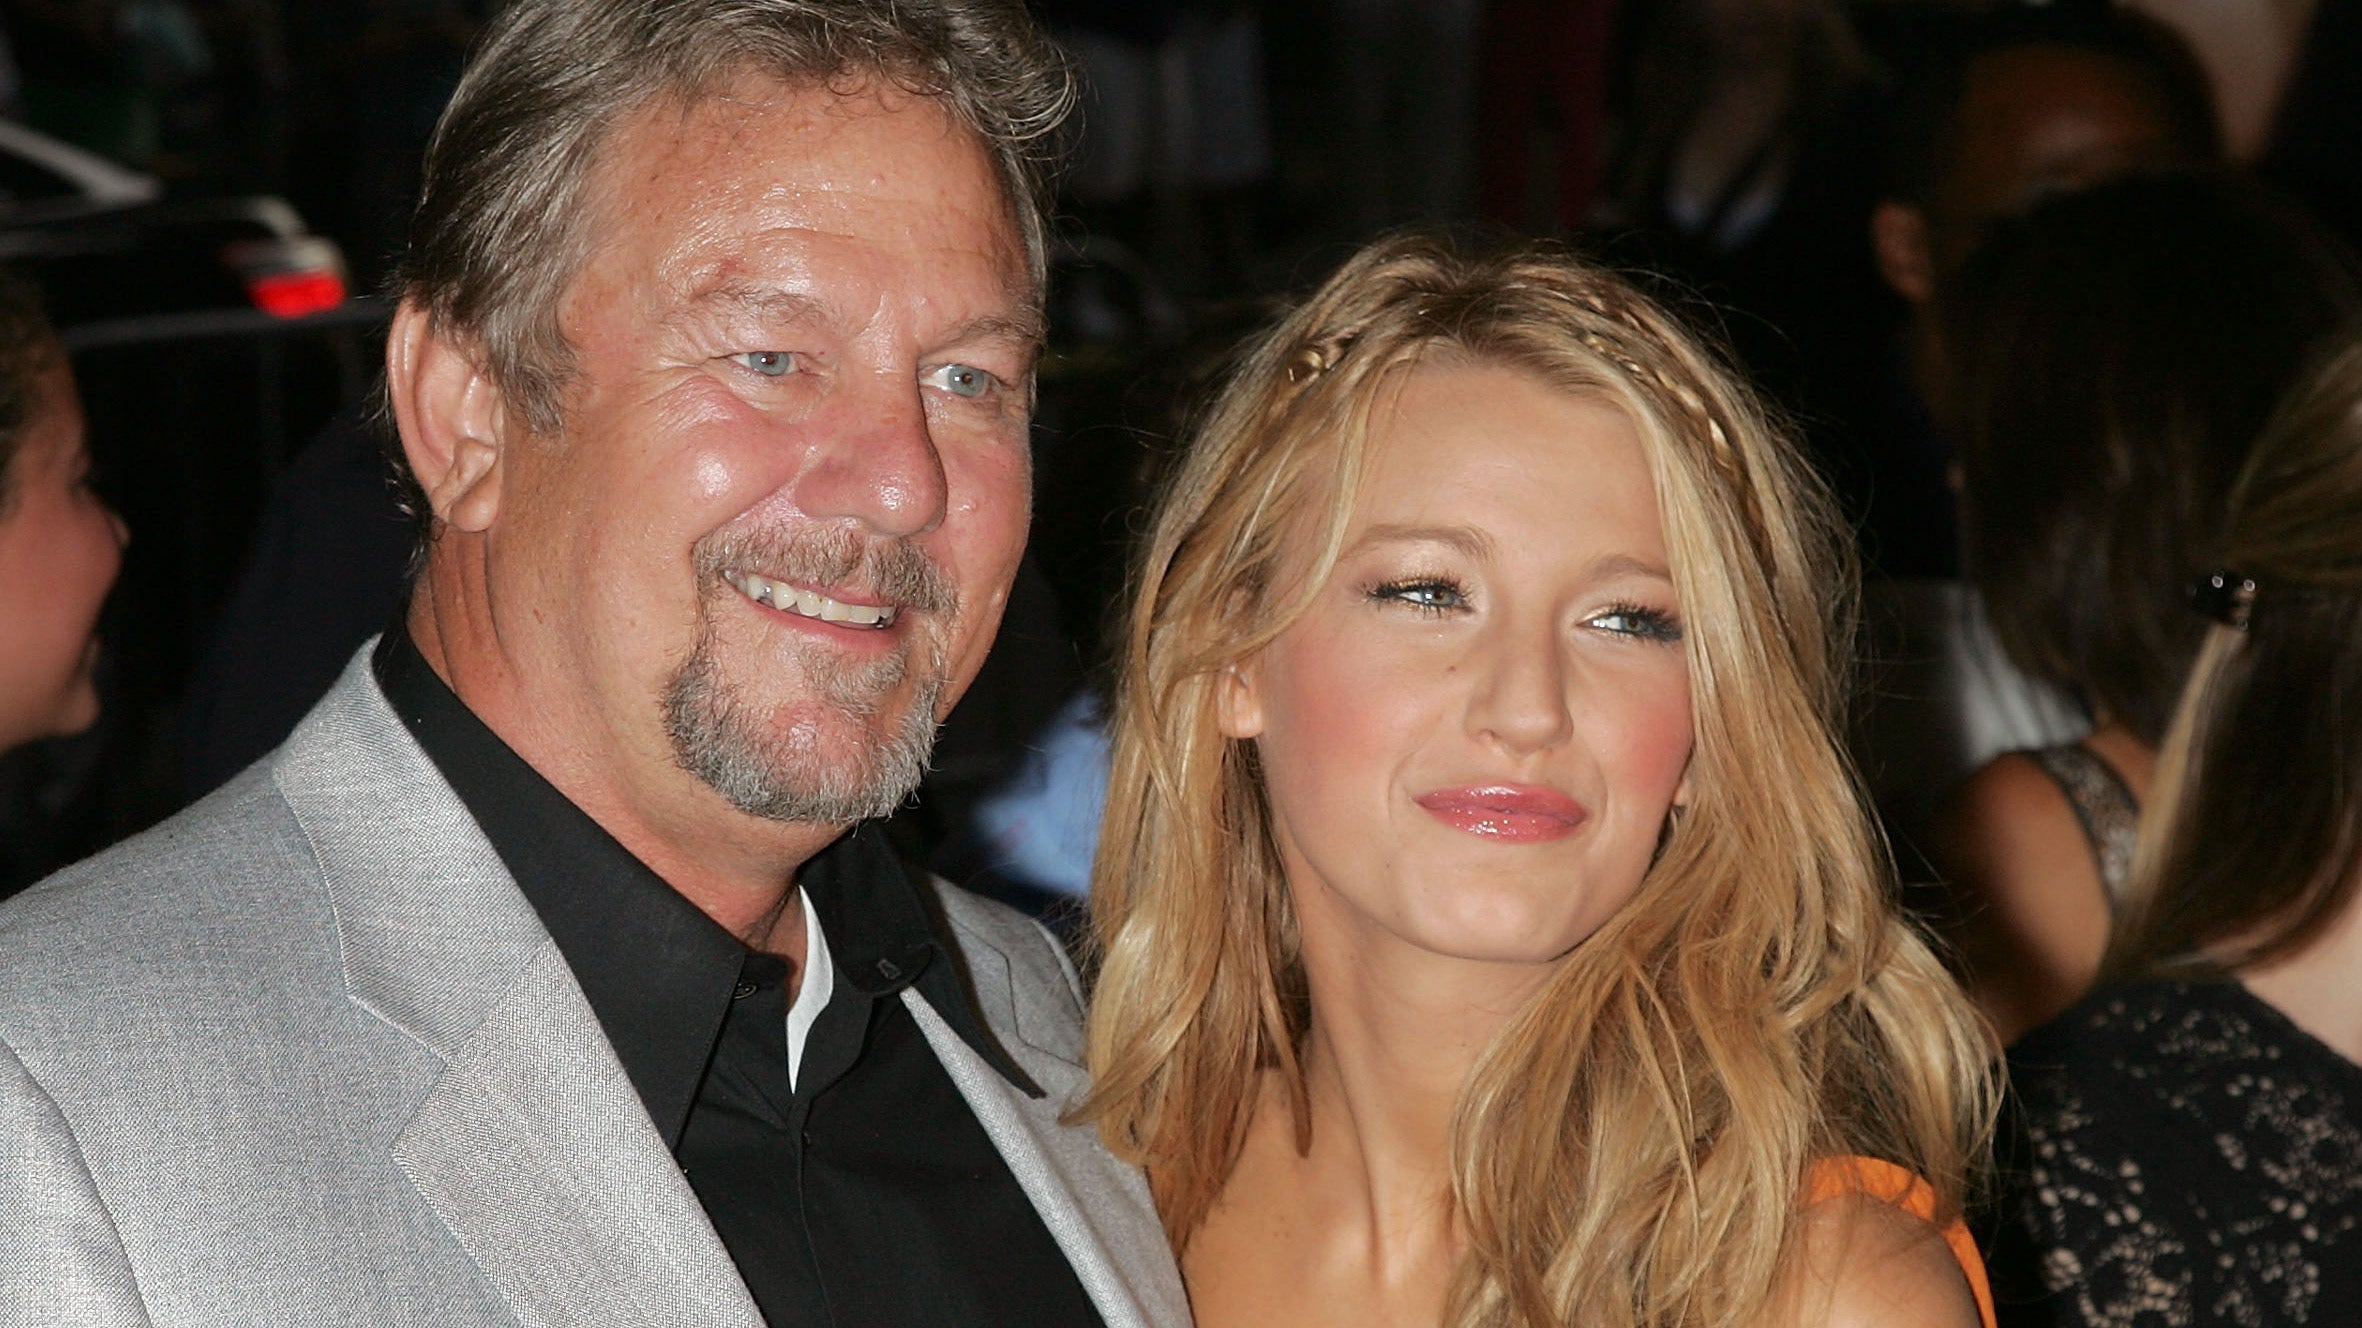 Ernie Lively, 'Sisterhood of the Traveling Pants' actor and father of Blake Lively, dead at 74